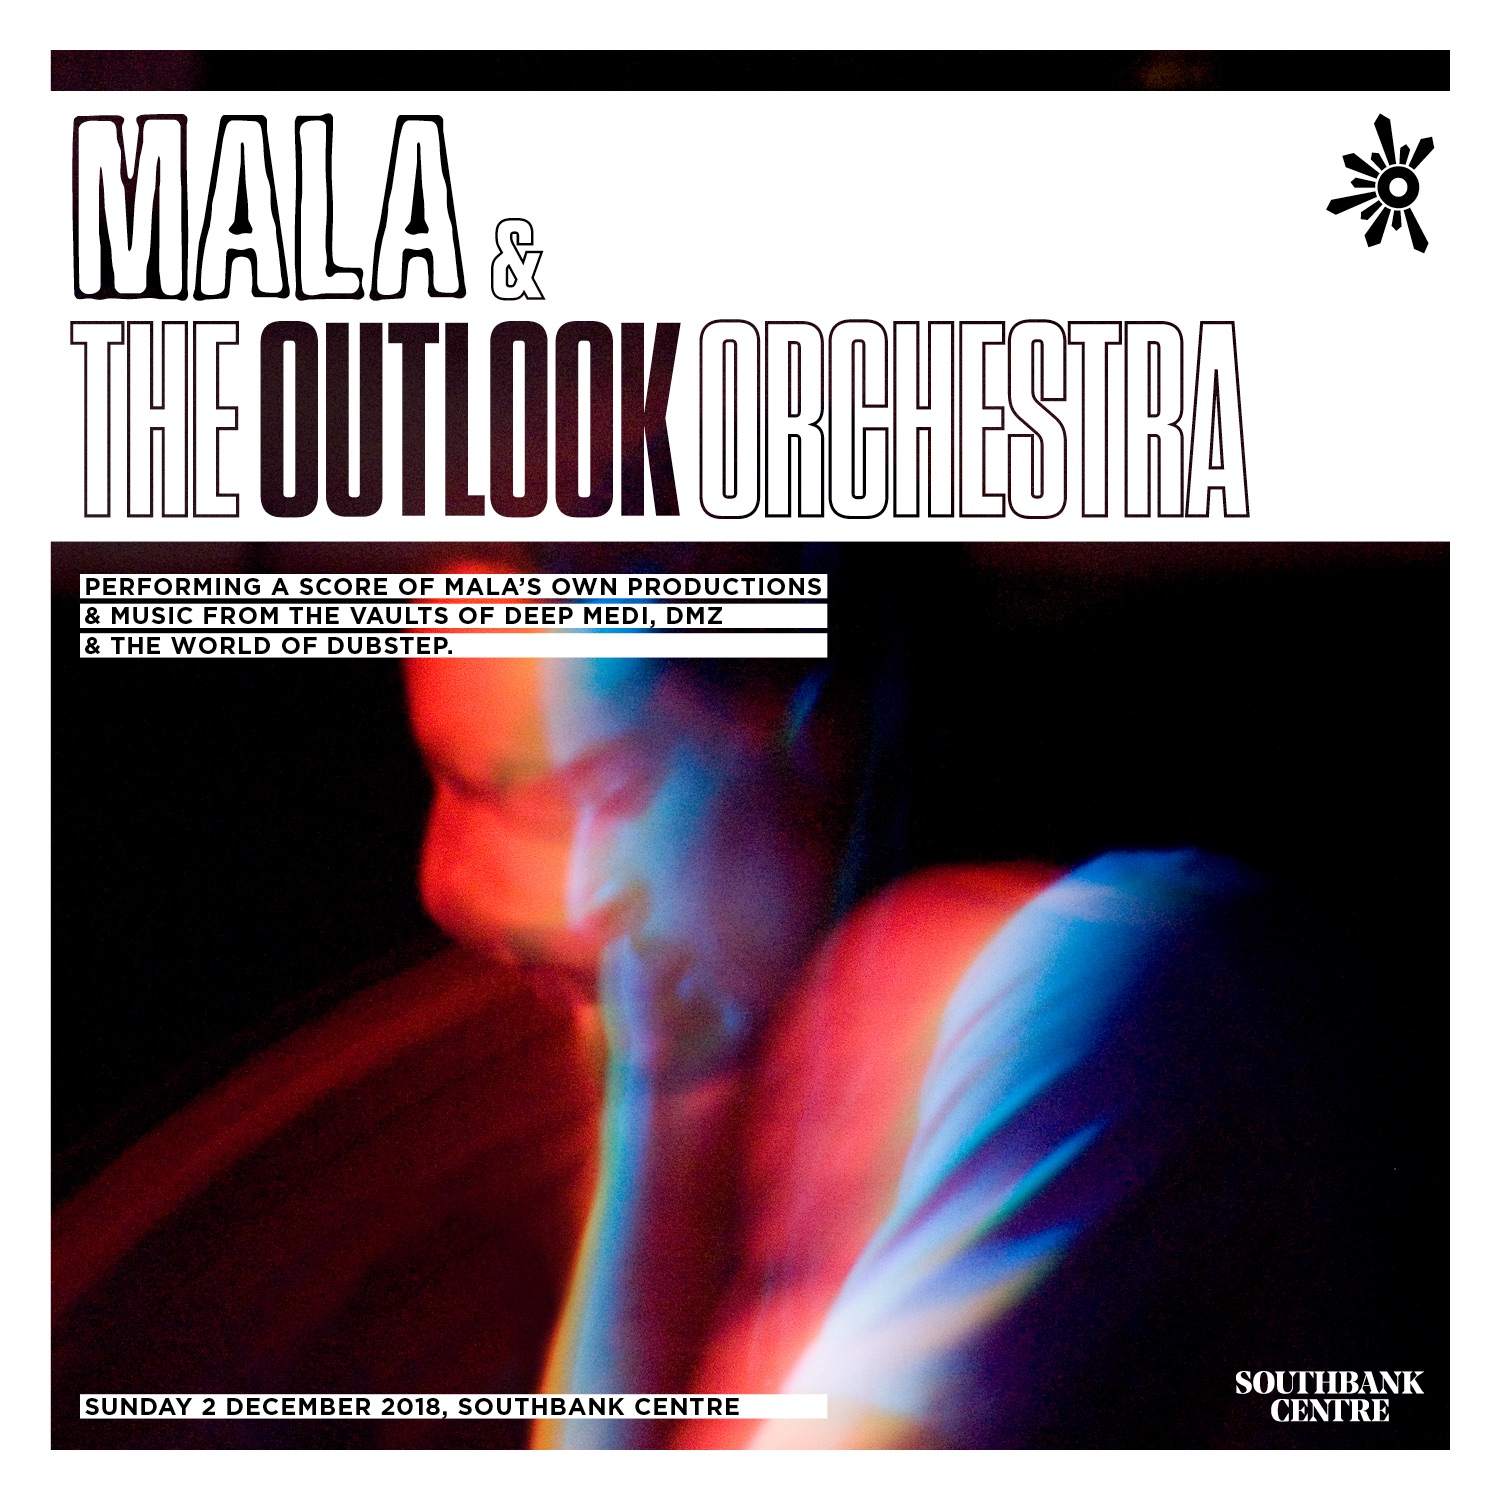 The Outlook Orchestra returns to London's Southbank Centre with Mala image